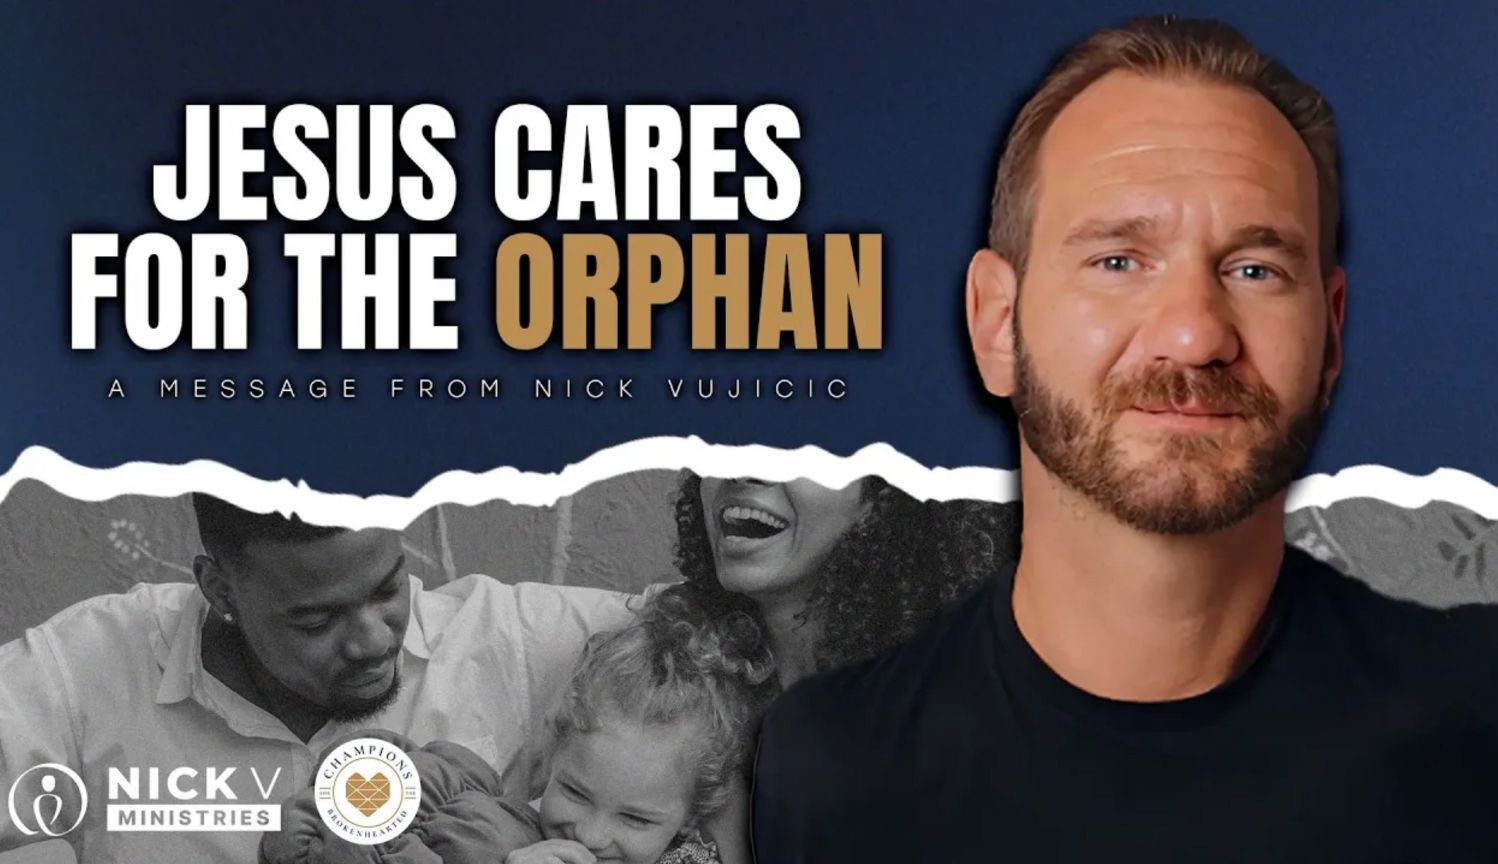 Jesus cares for the orphan